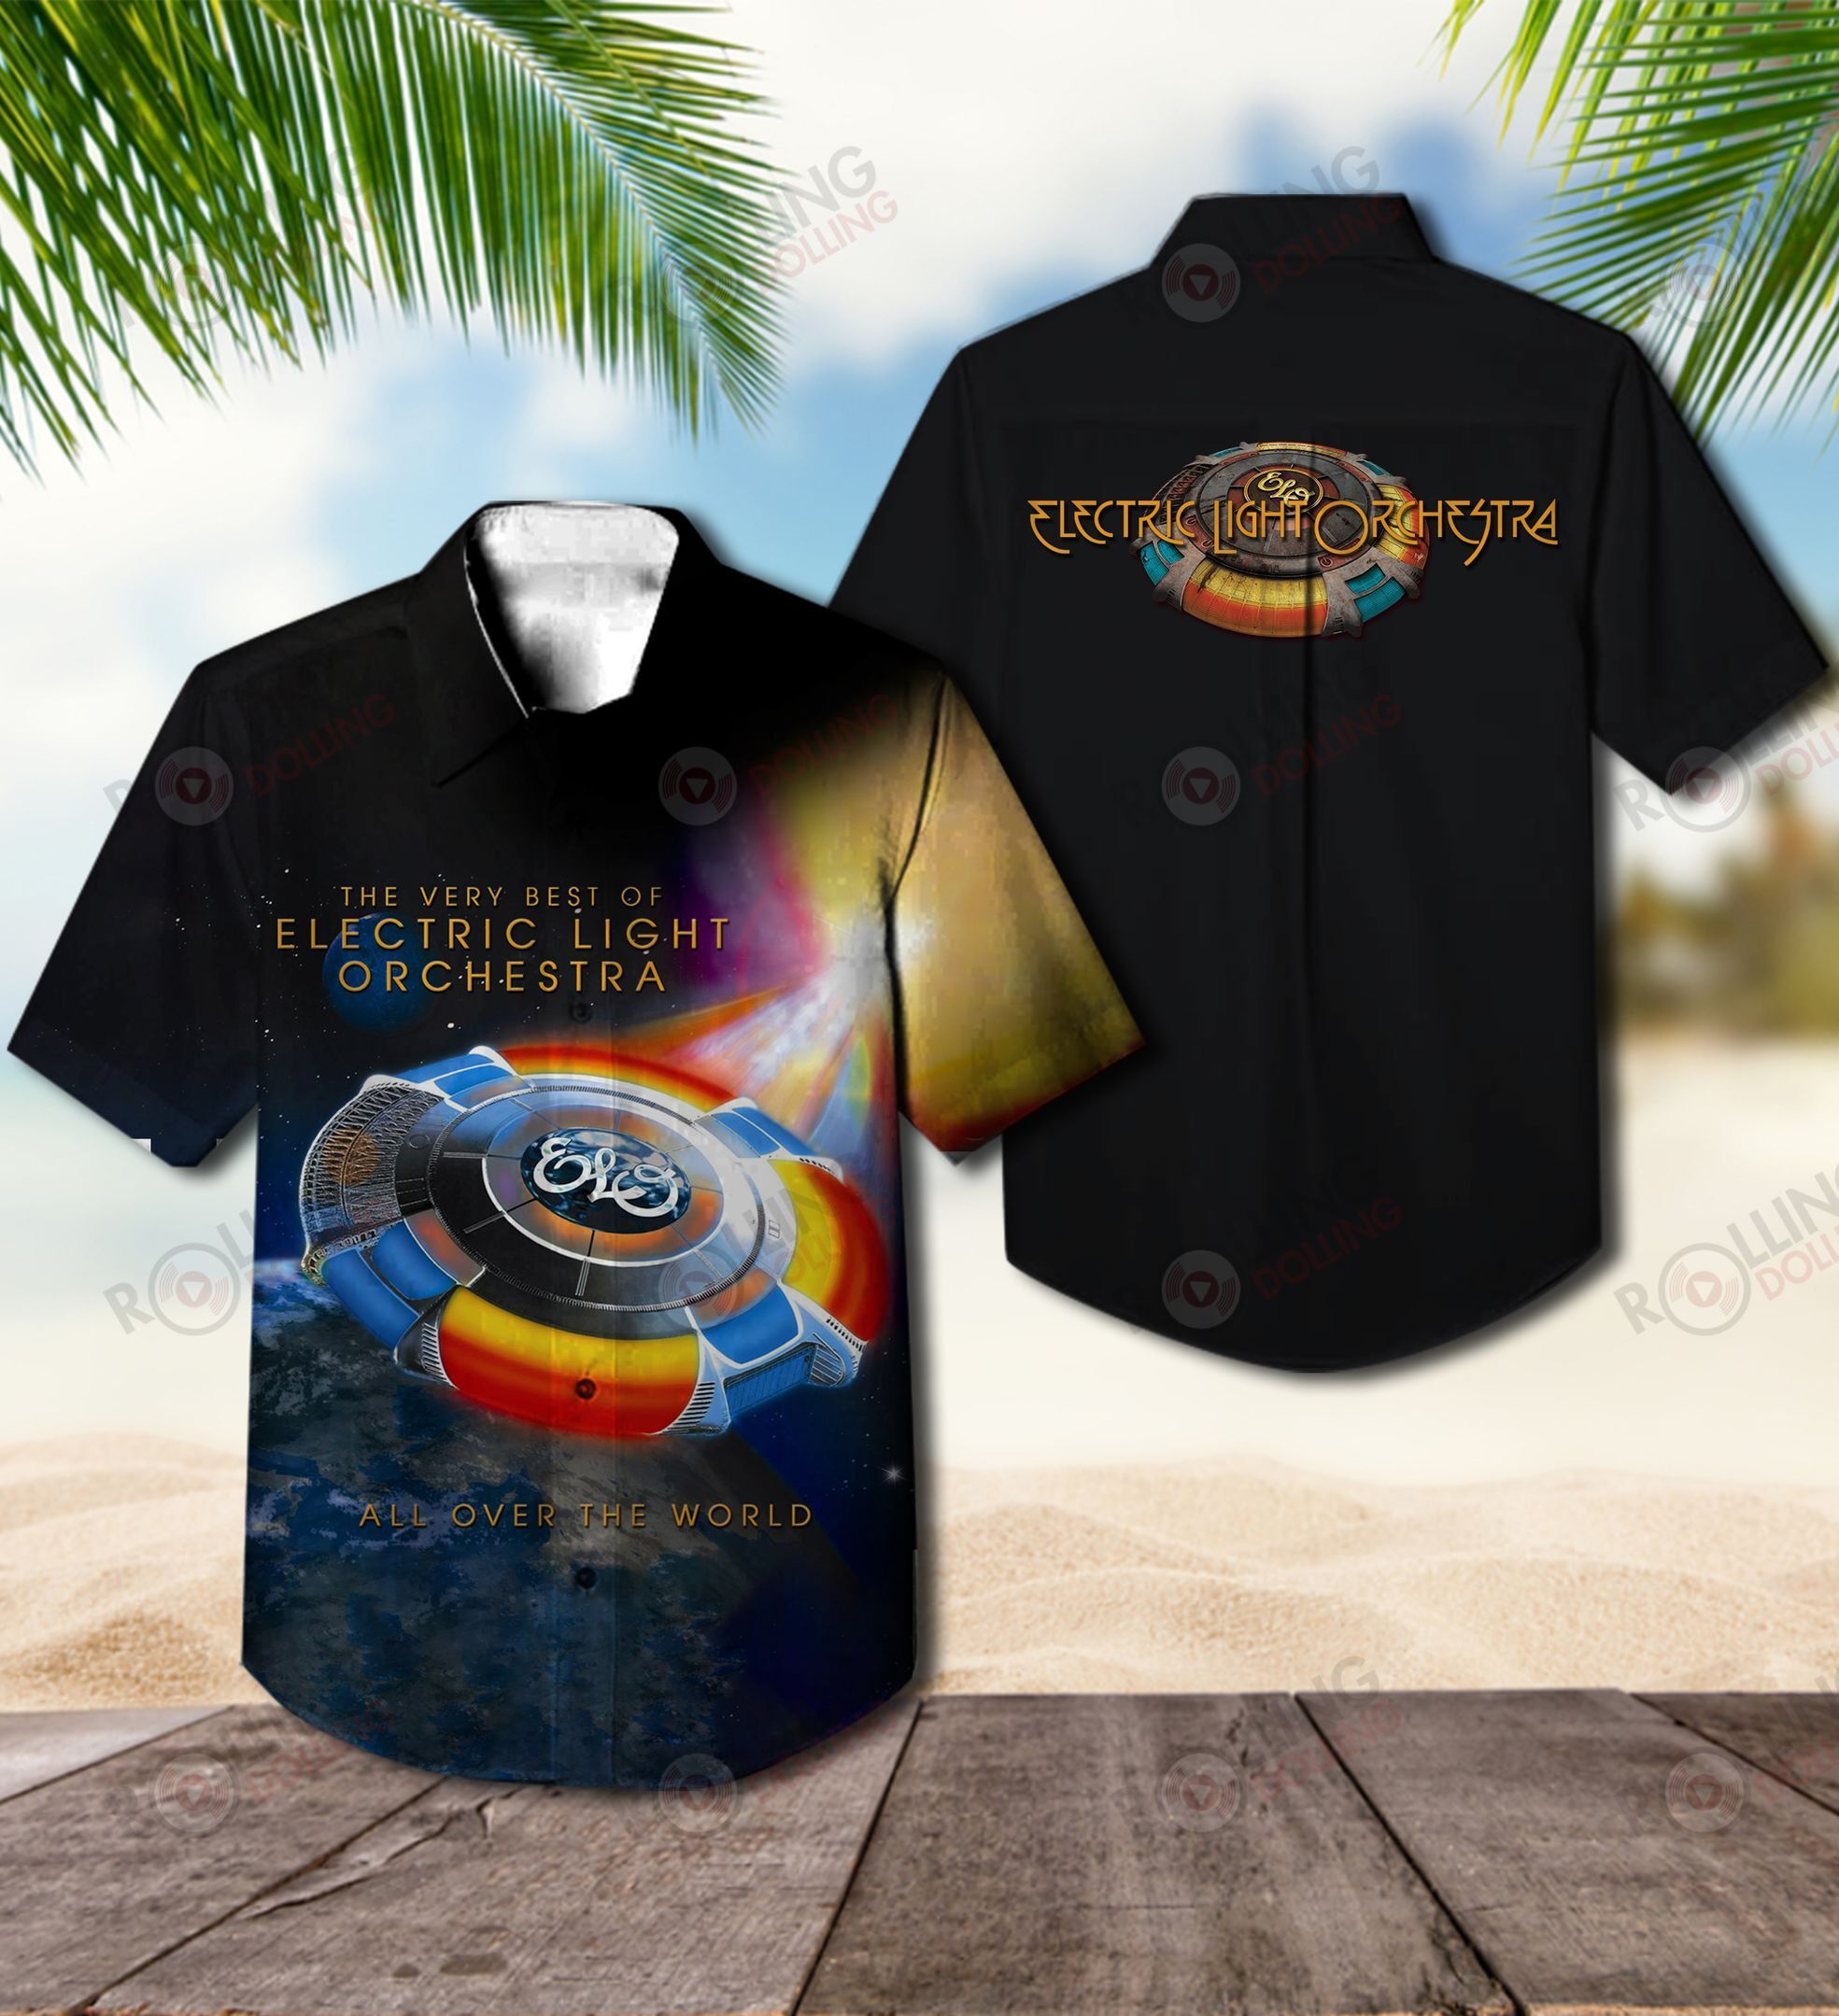 This would make a great gift for any fan who loves Hawaiian Shirt as well as Rock band 133